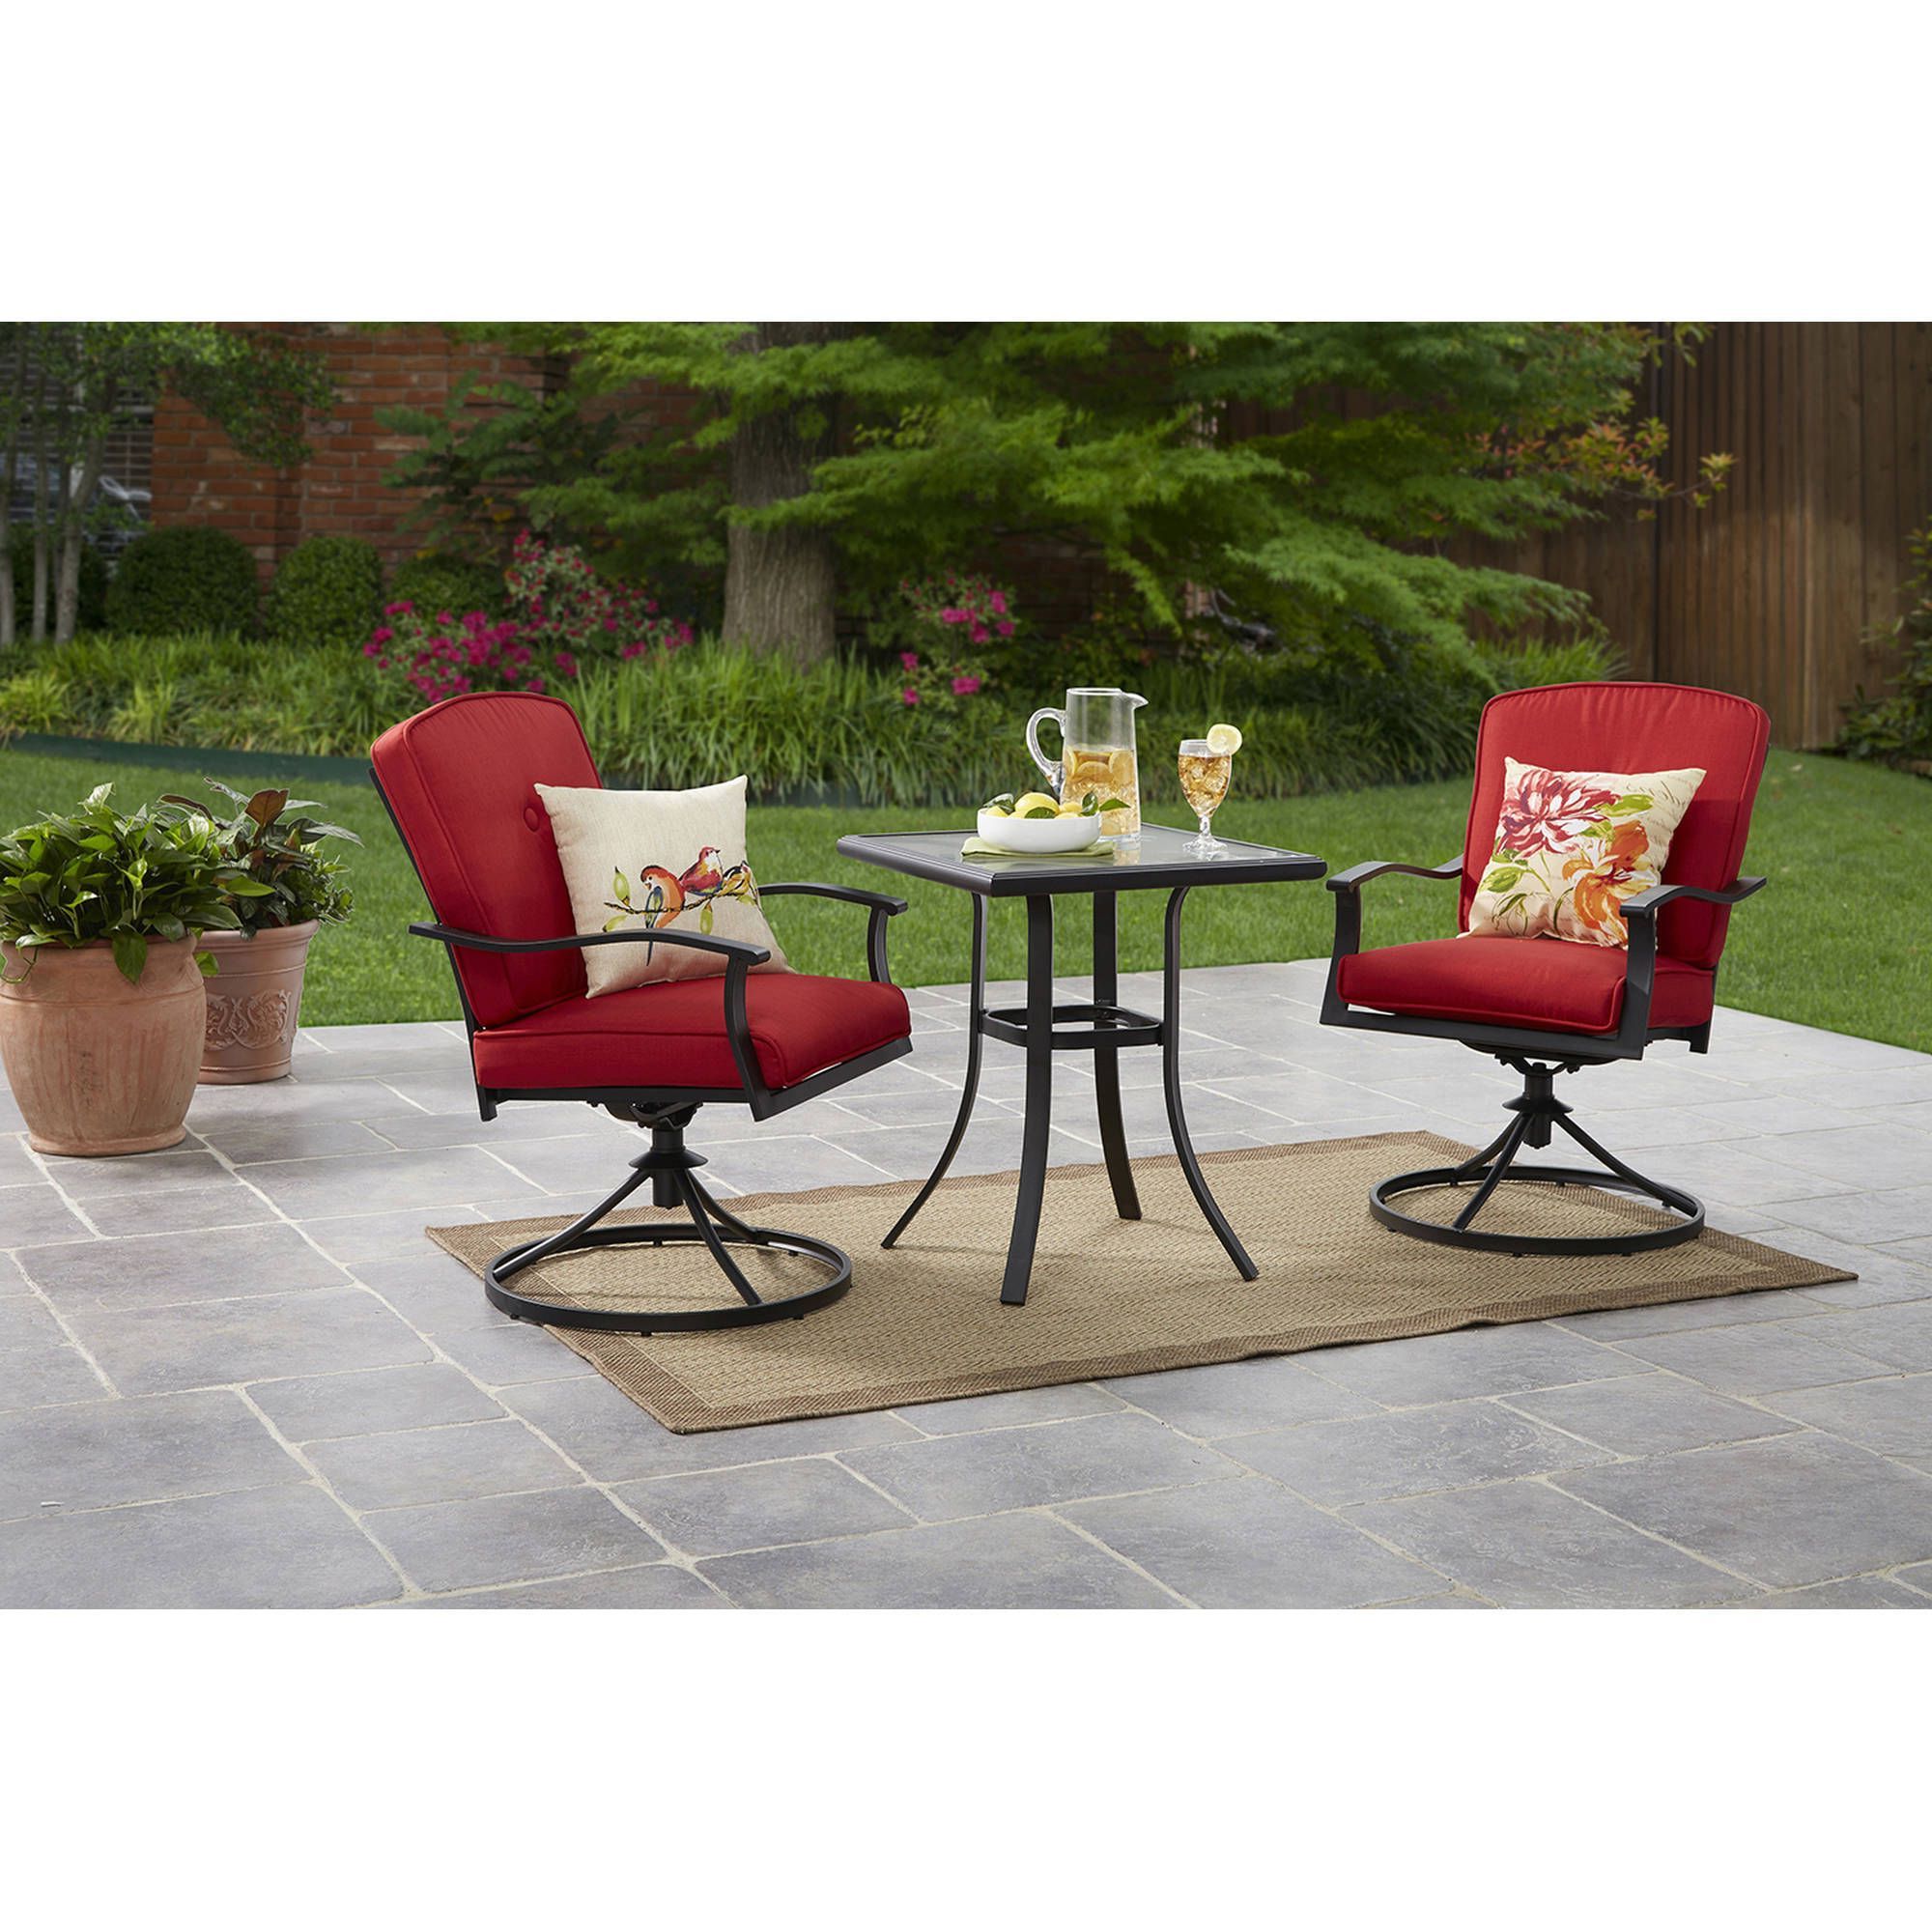 3 Piece Outdoor Table And Chair Sets Within Newest Mainstays Belden Park 3 Piece Outdoor Bistro Set For Patio And Porch (View 2 of 15)